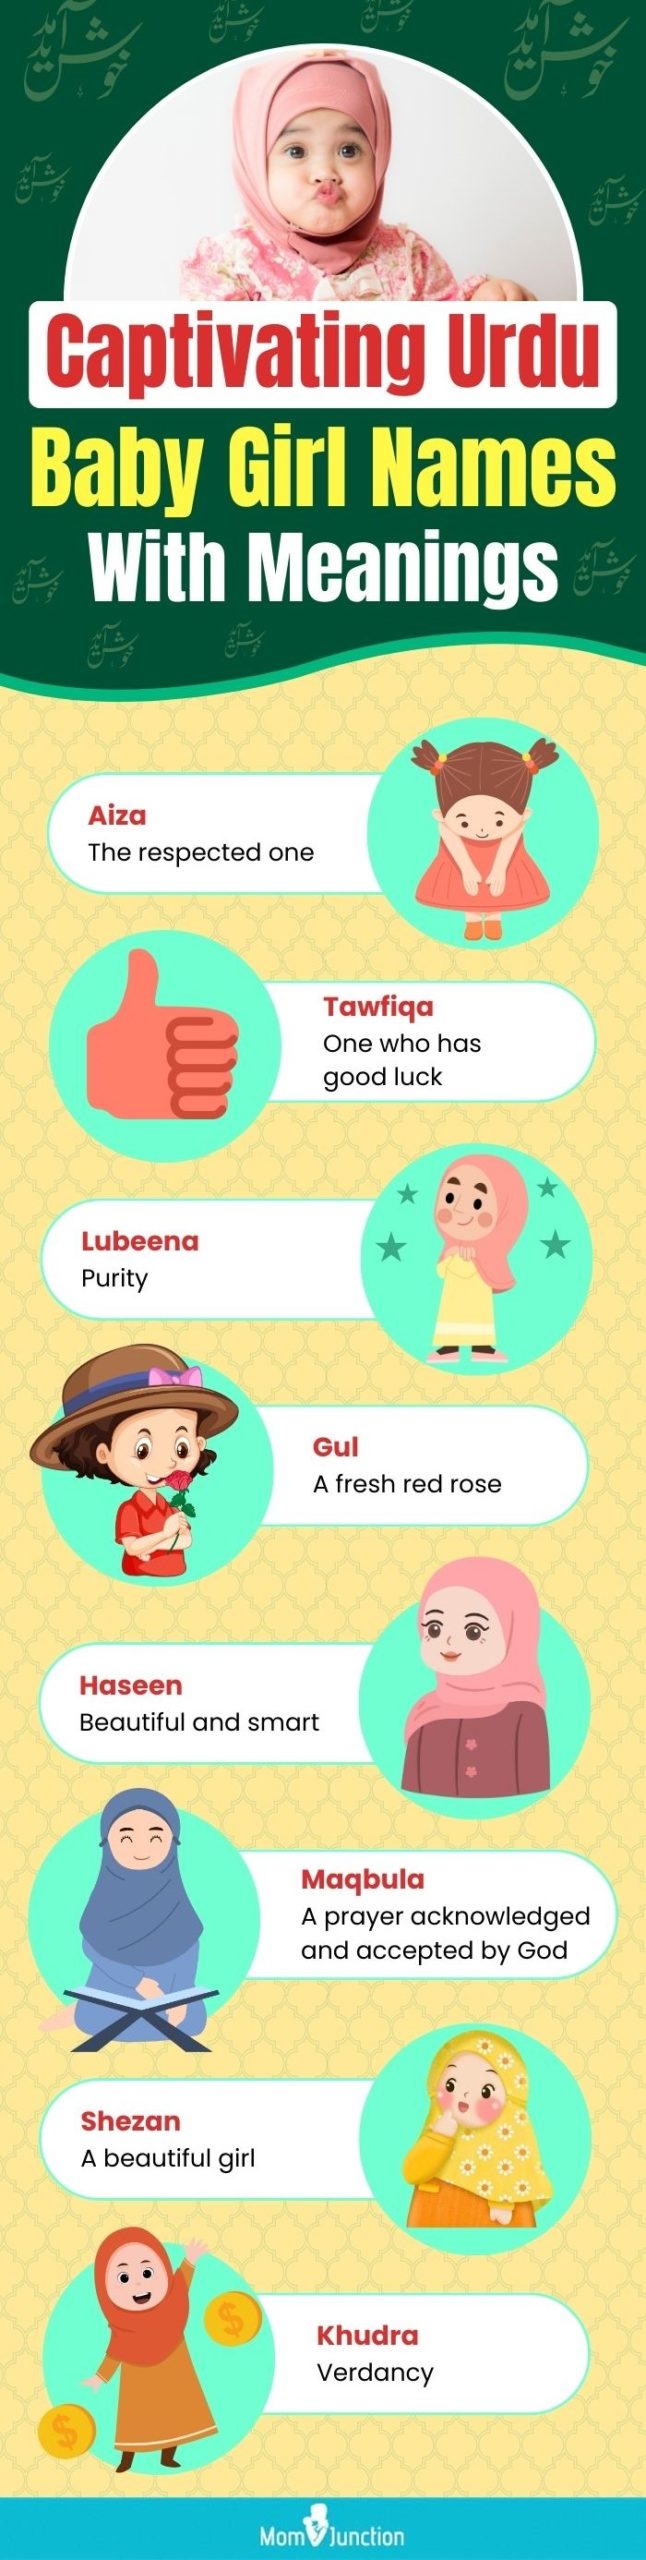 captivating urdu baby girl names with meanings (infographic)